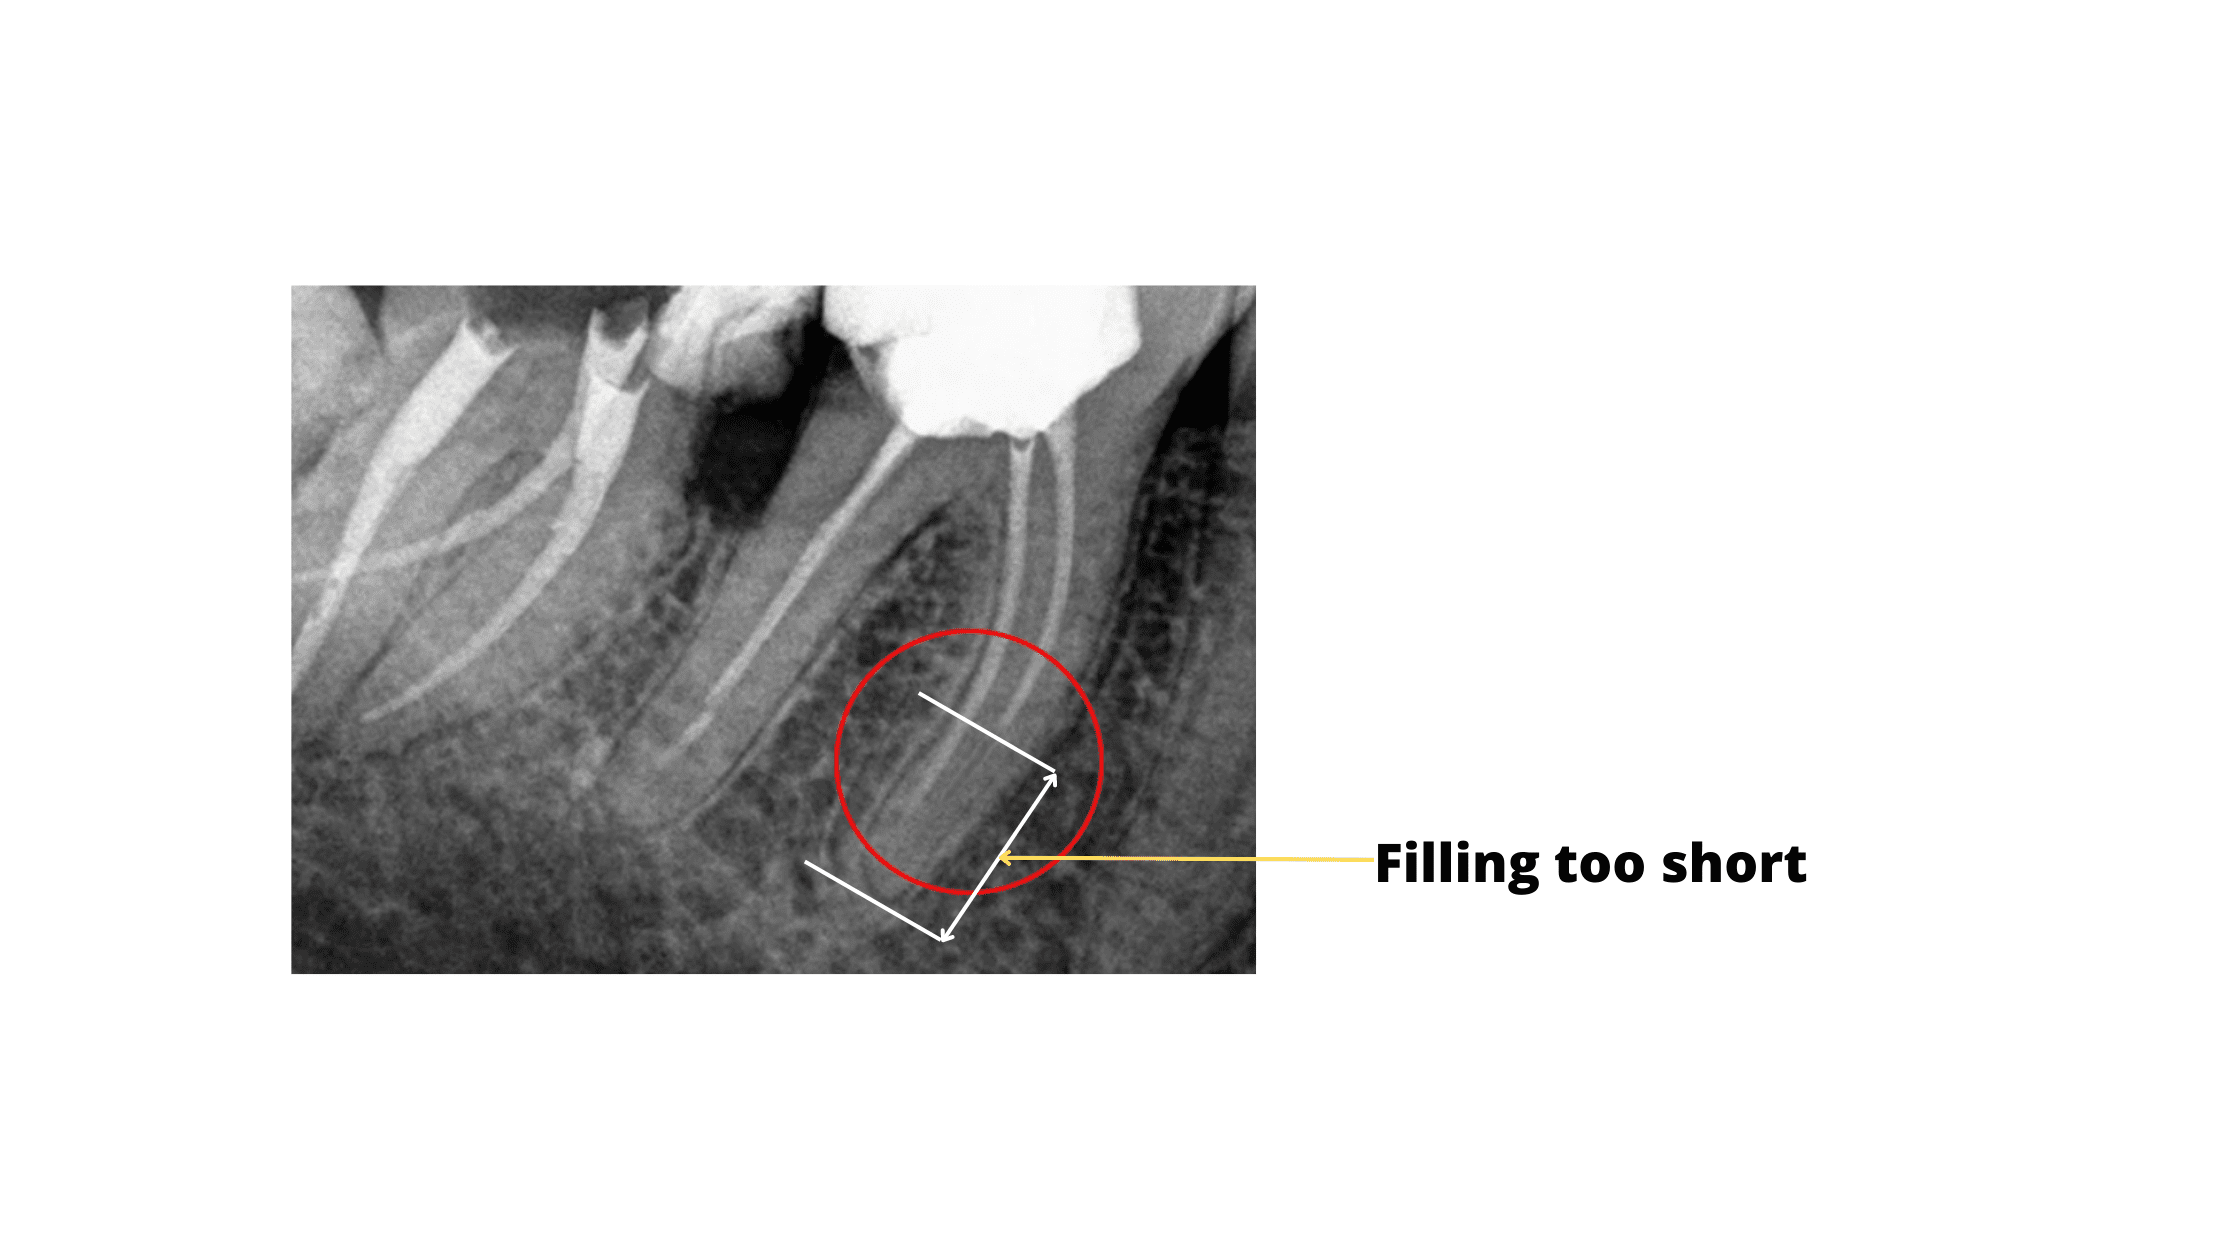 Root canal filling too short (x-ray image)